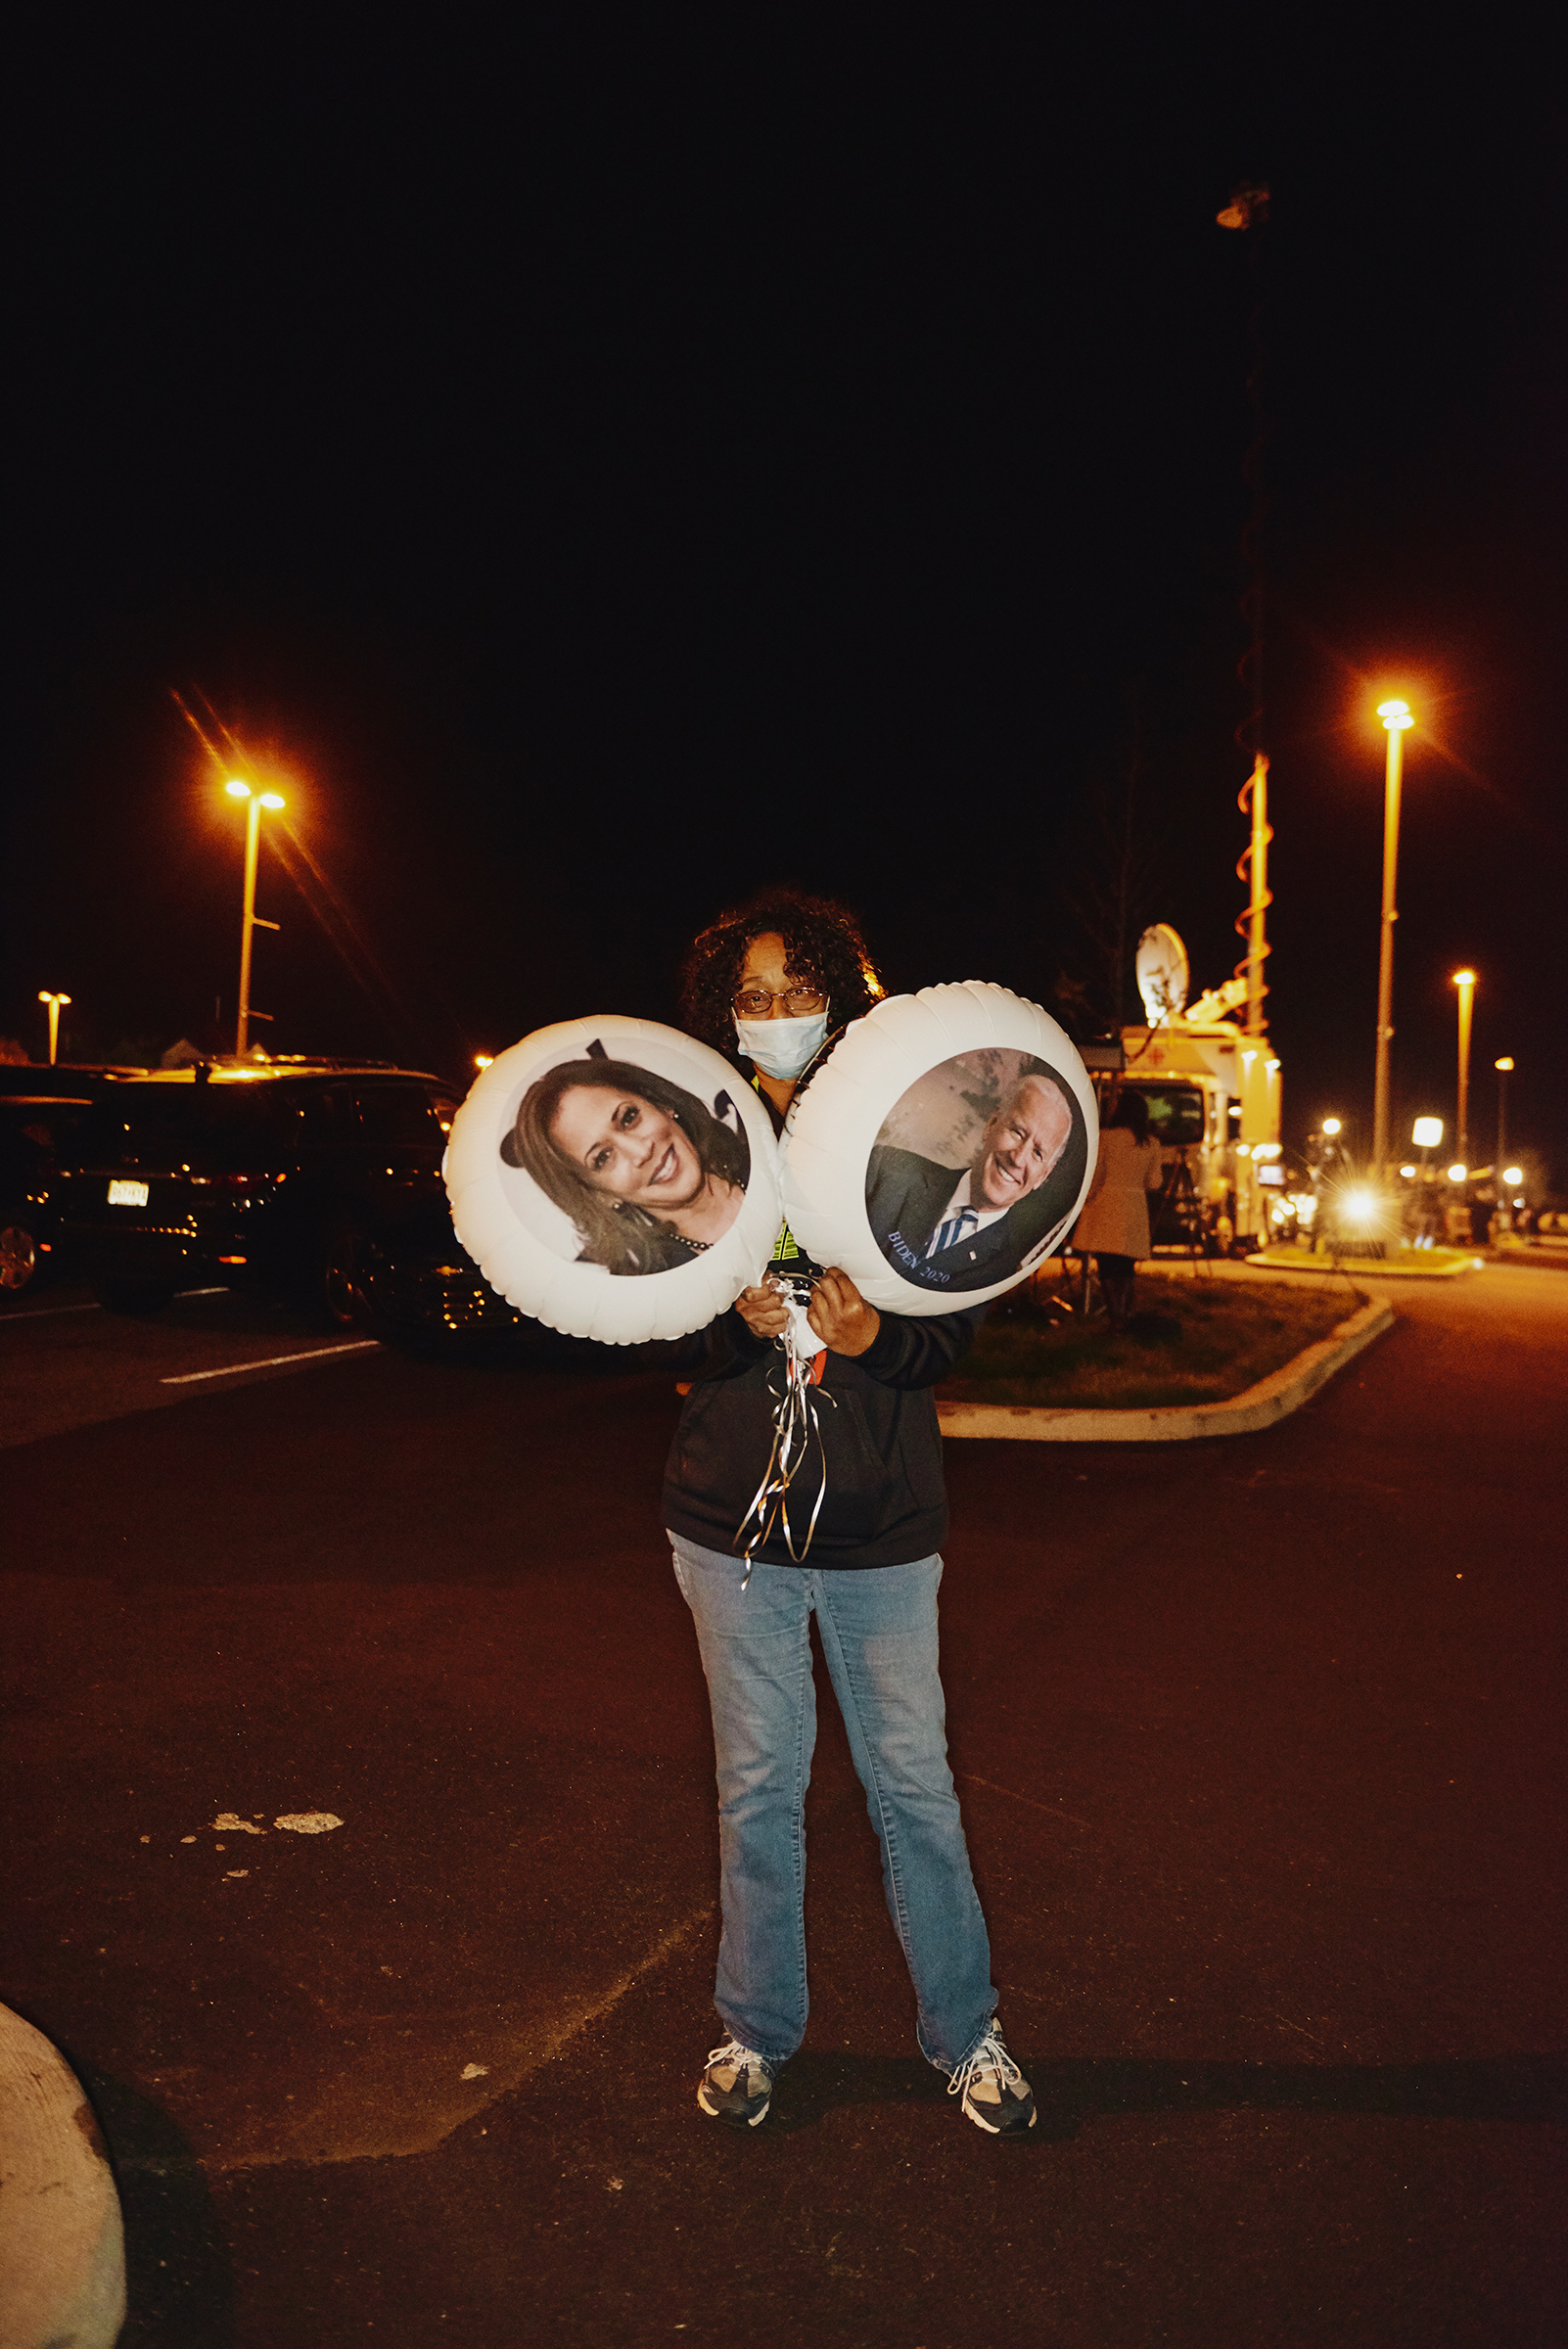 Violetta Smith holds portrait balloons of Harris and Biden at an outdoor election-night event in Wilmington, Del.